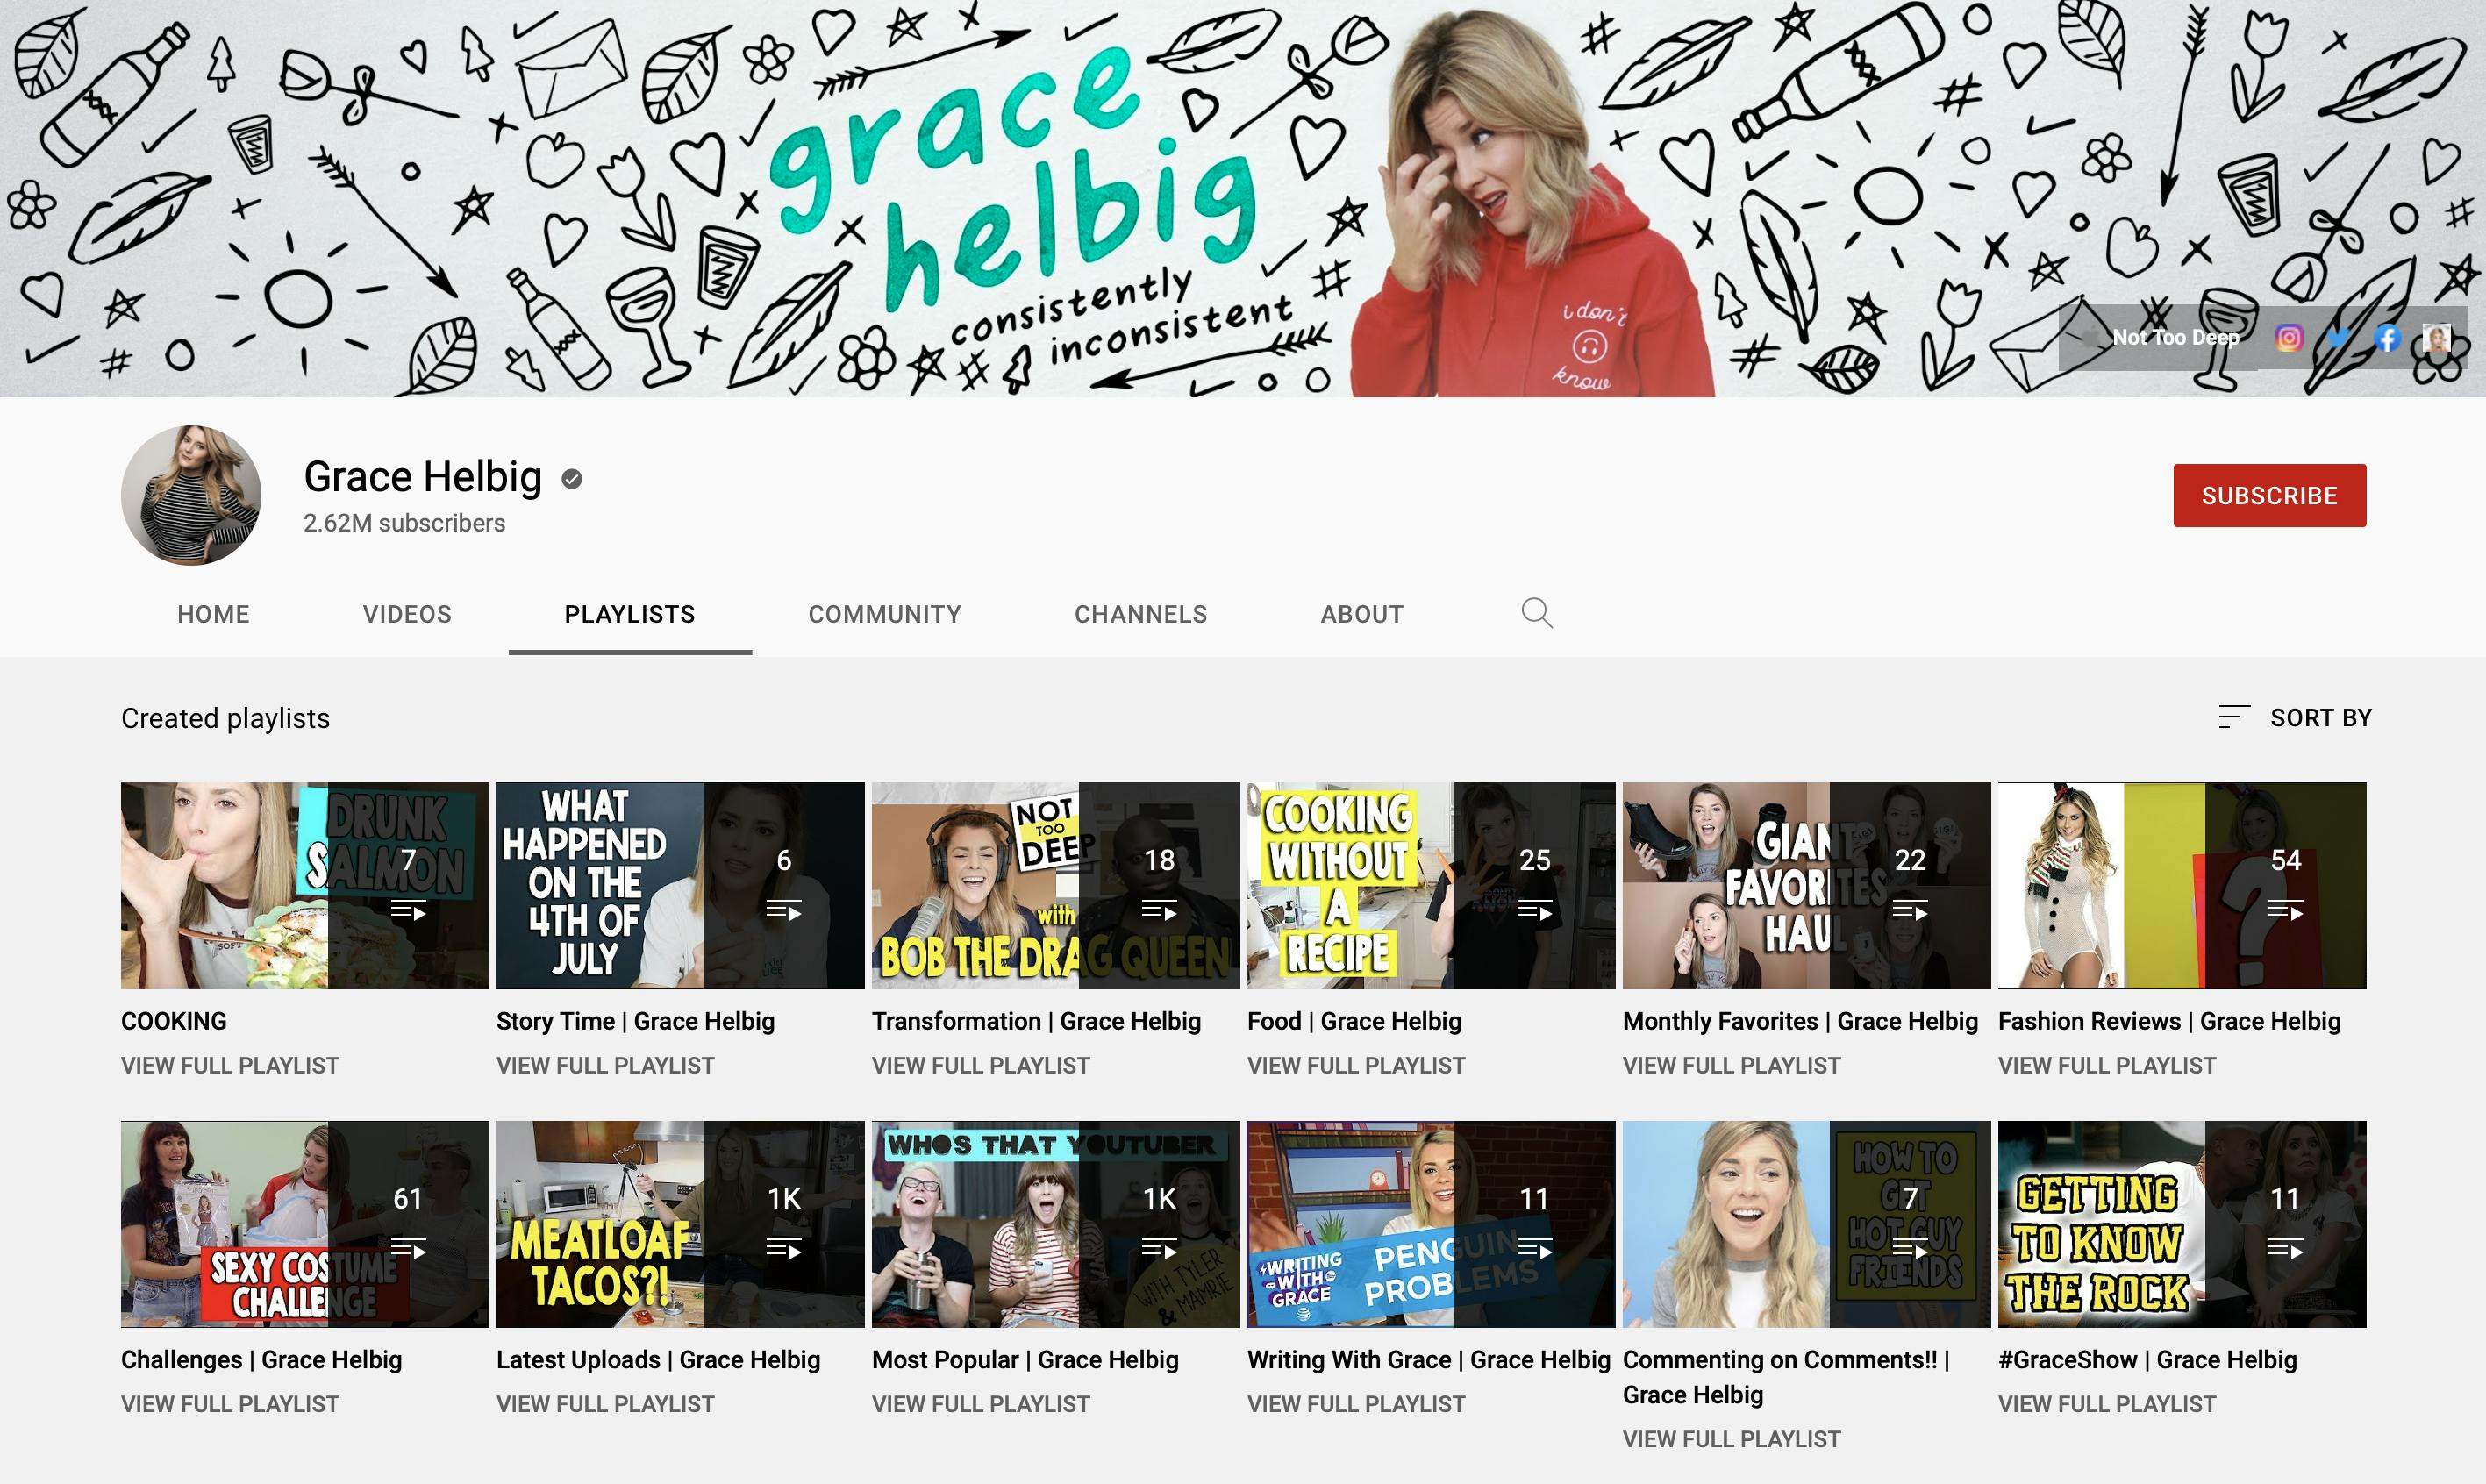 Grace Helbig YouTube Channel home page with video playlists